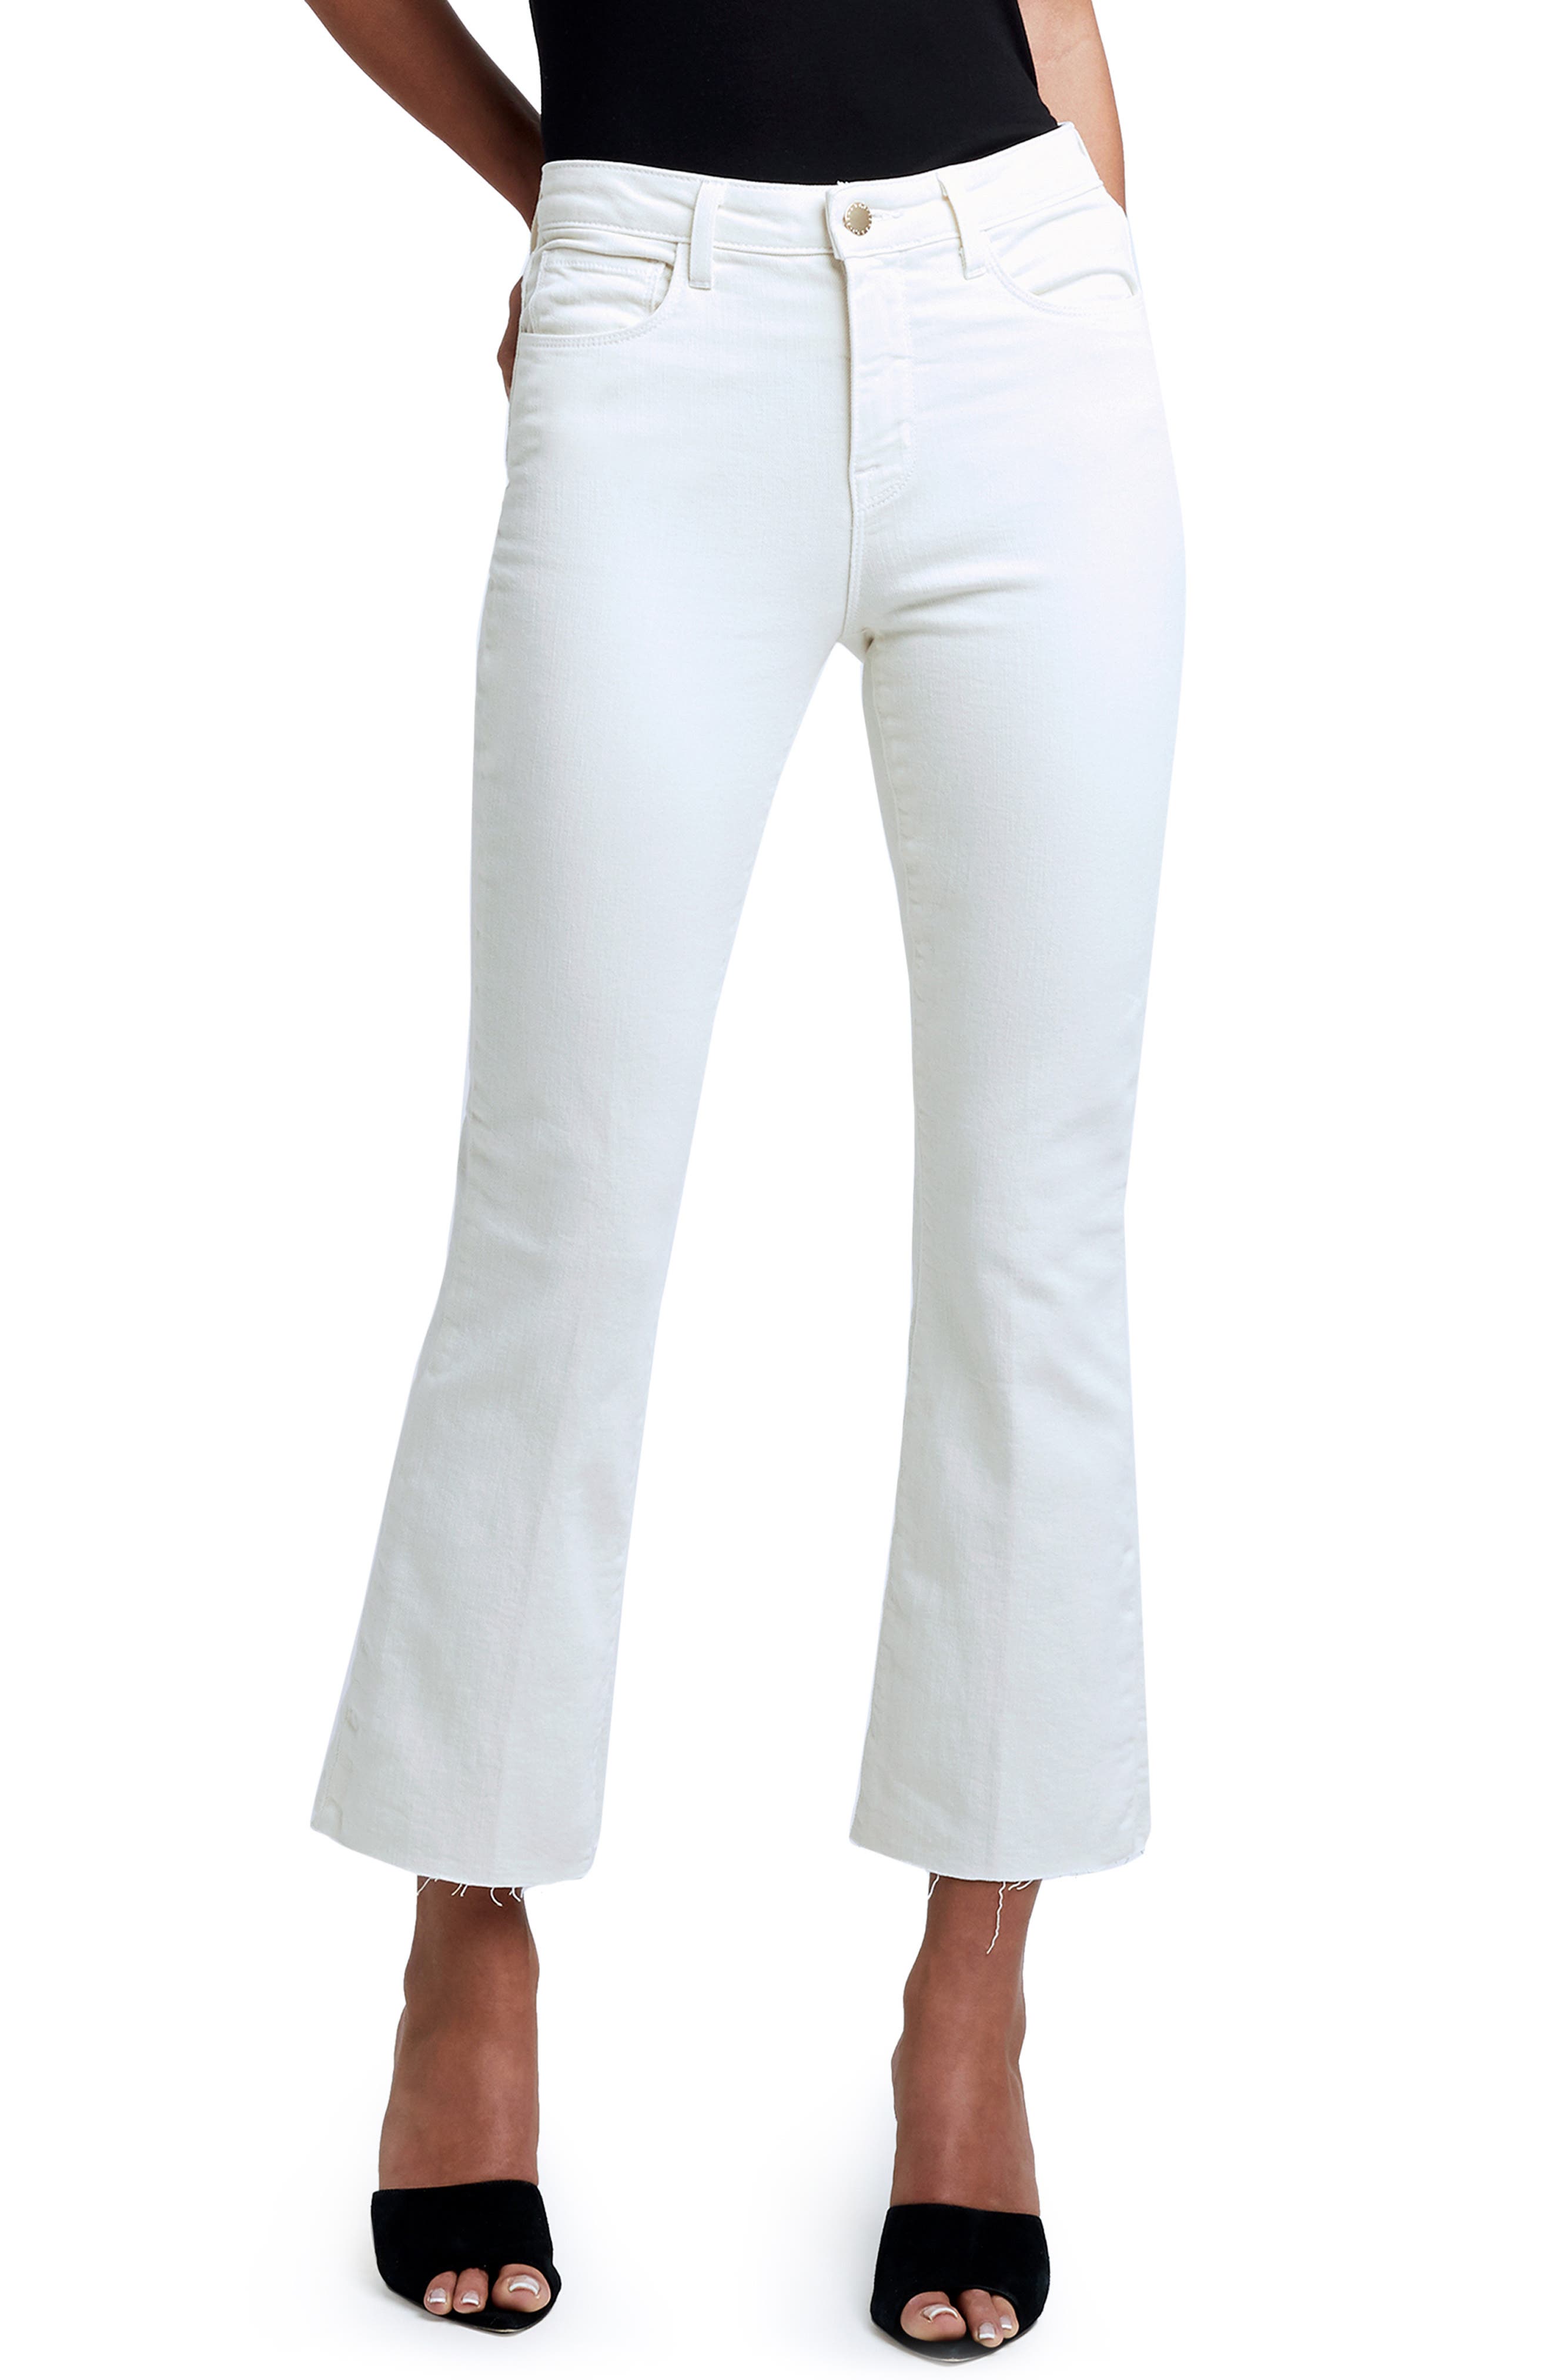 L'AGENCE Flare Leg Ankle Pants in Vintage White